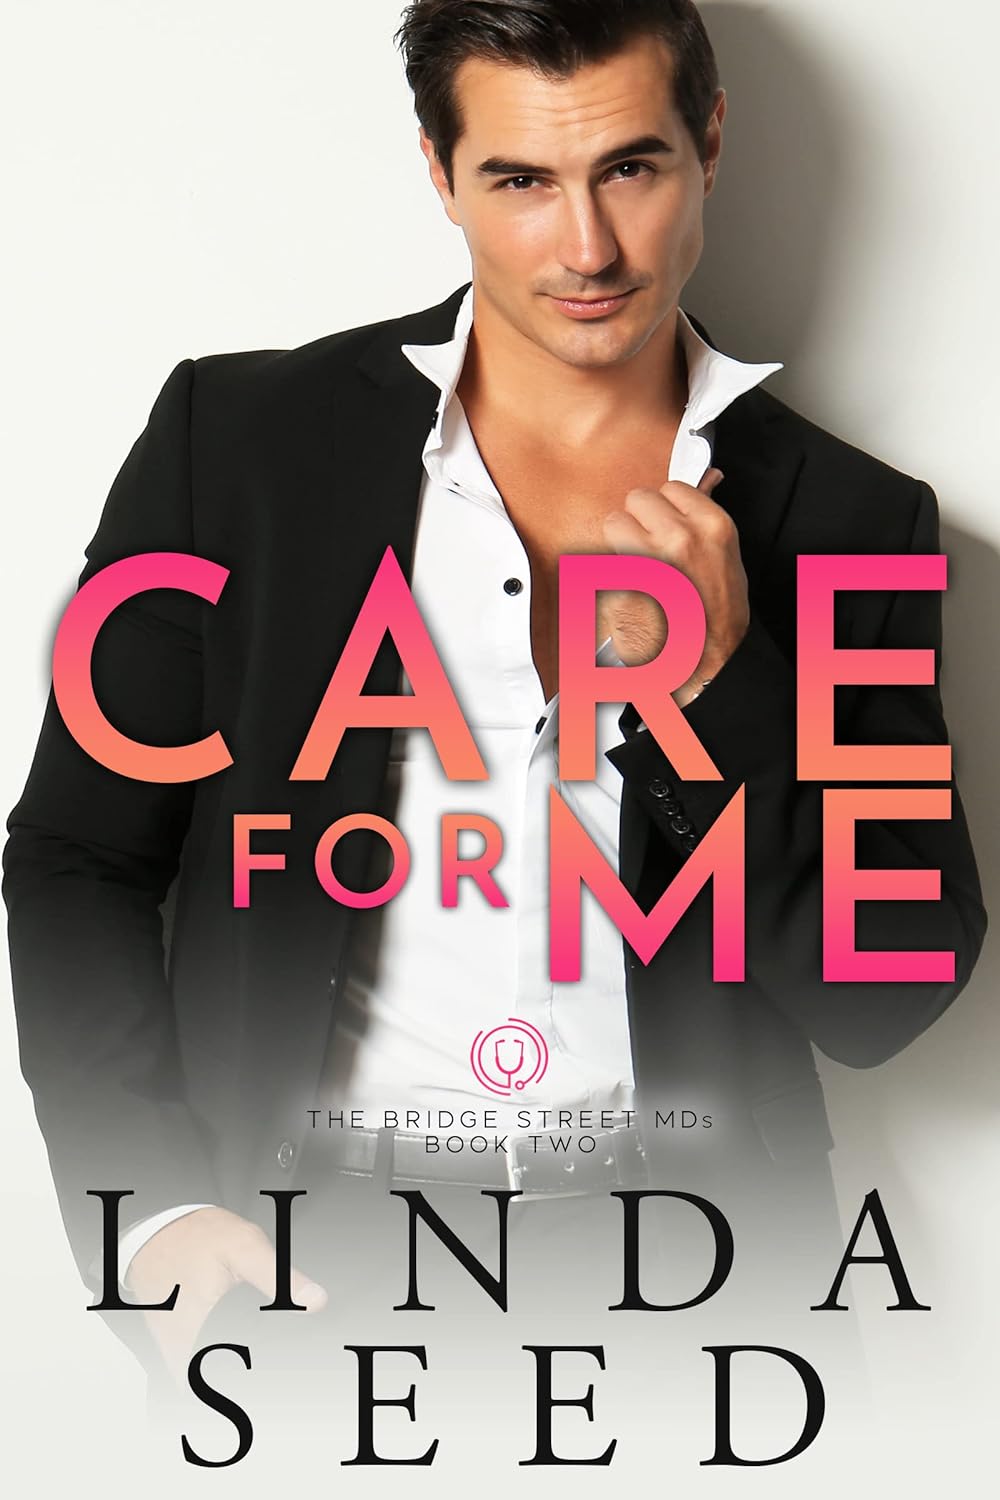 Care for Me Contemporary Romance by Bestselling Author Linda Seed